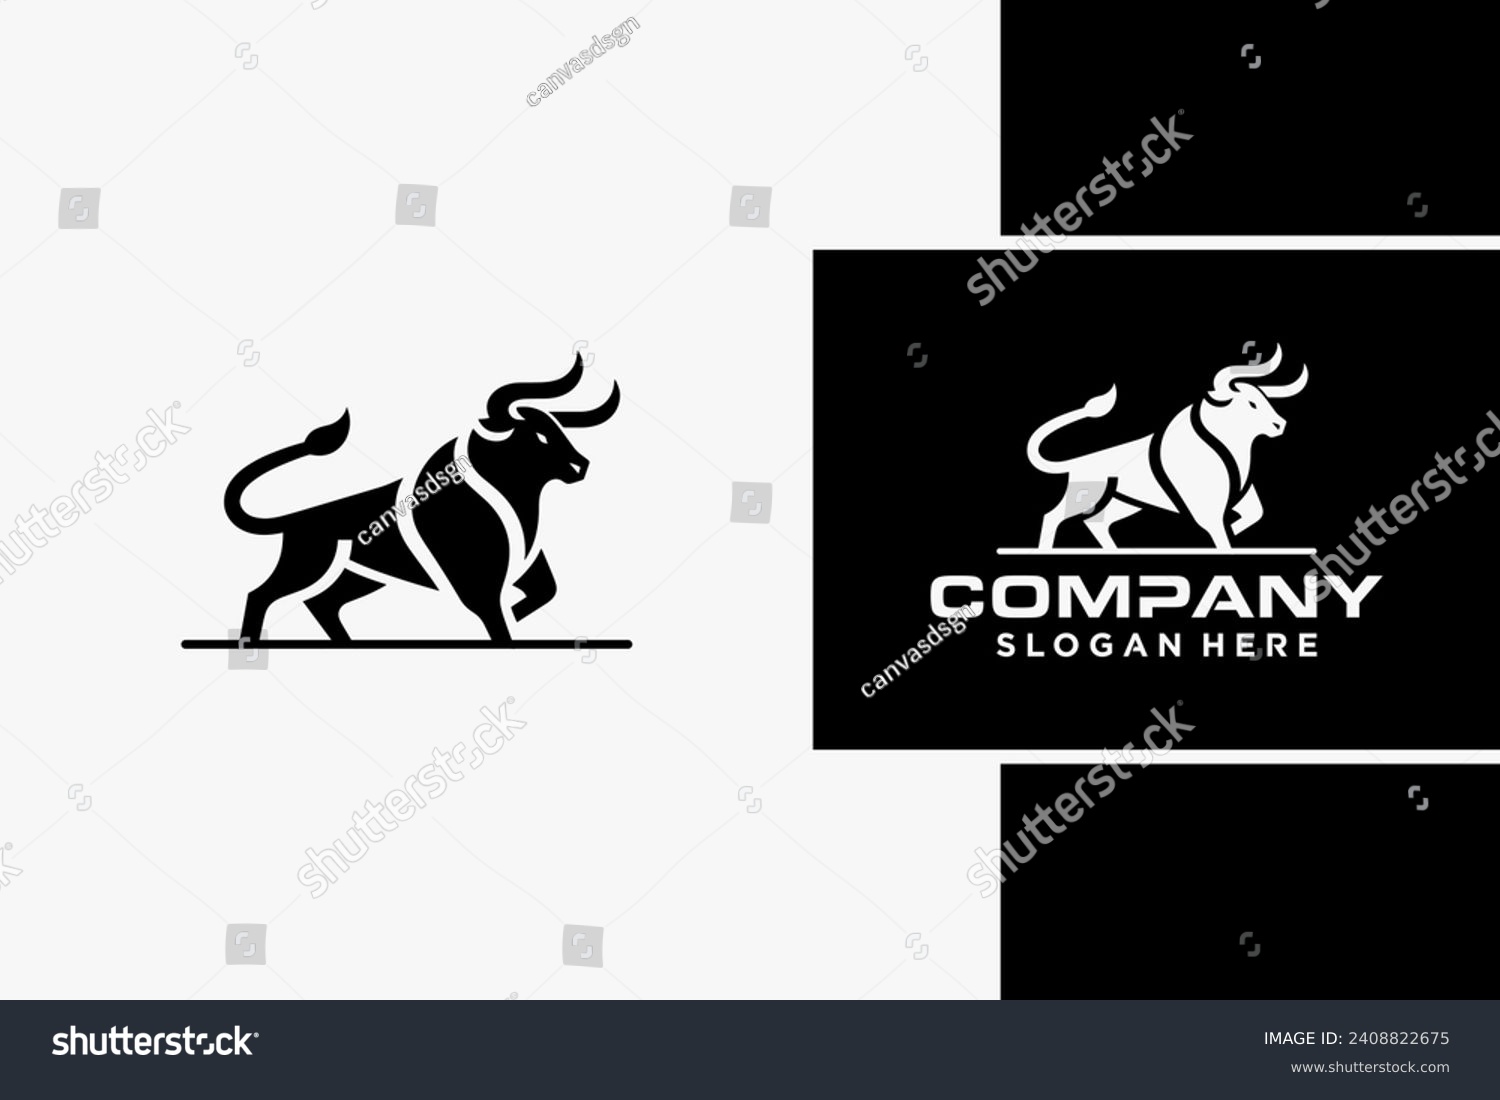 SVG of Bull Logo Design, Bull silhouette, symbol of the year in the Chinese zodiac calendar. Vector illustration of a standing horned ox or a black angus isolated on a black and white background svg